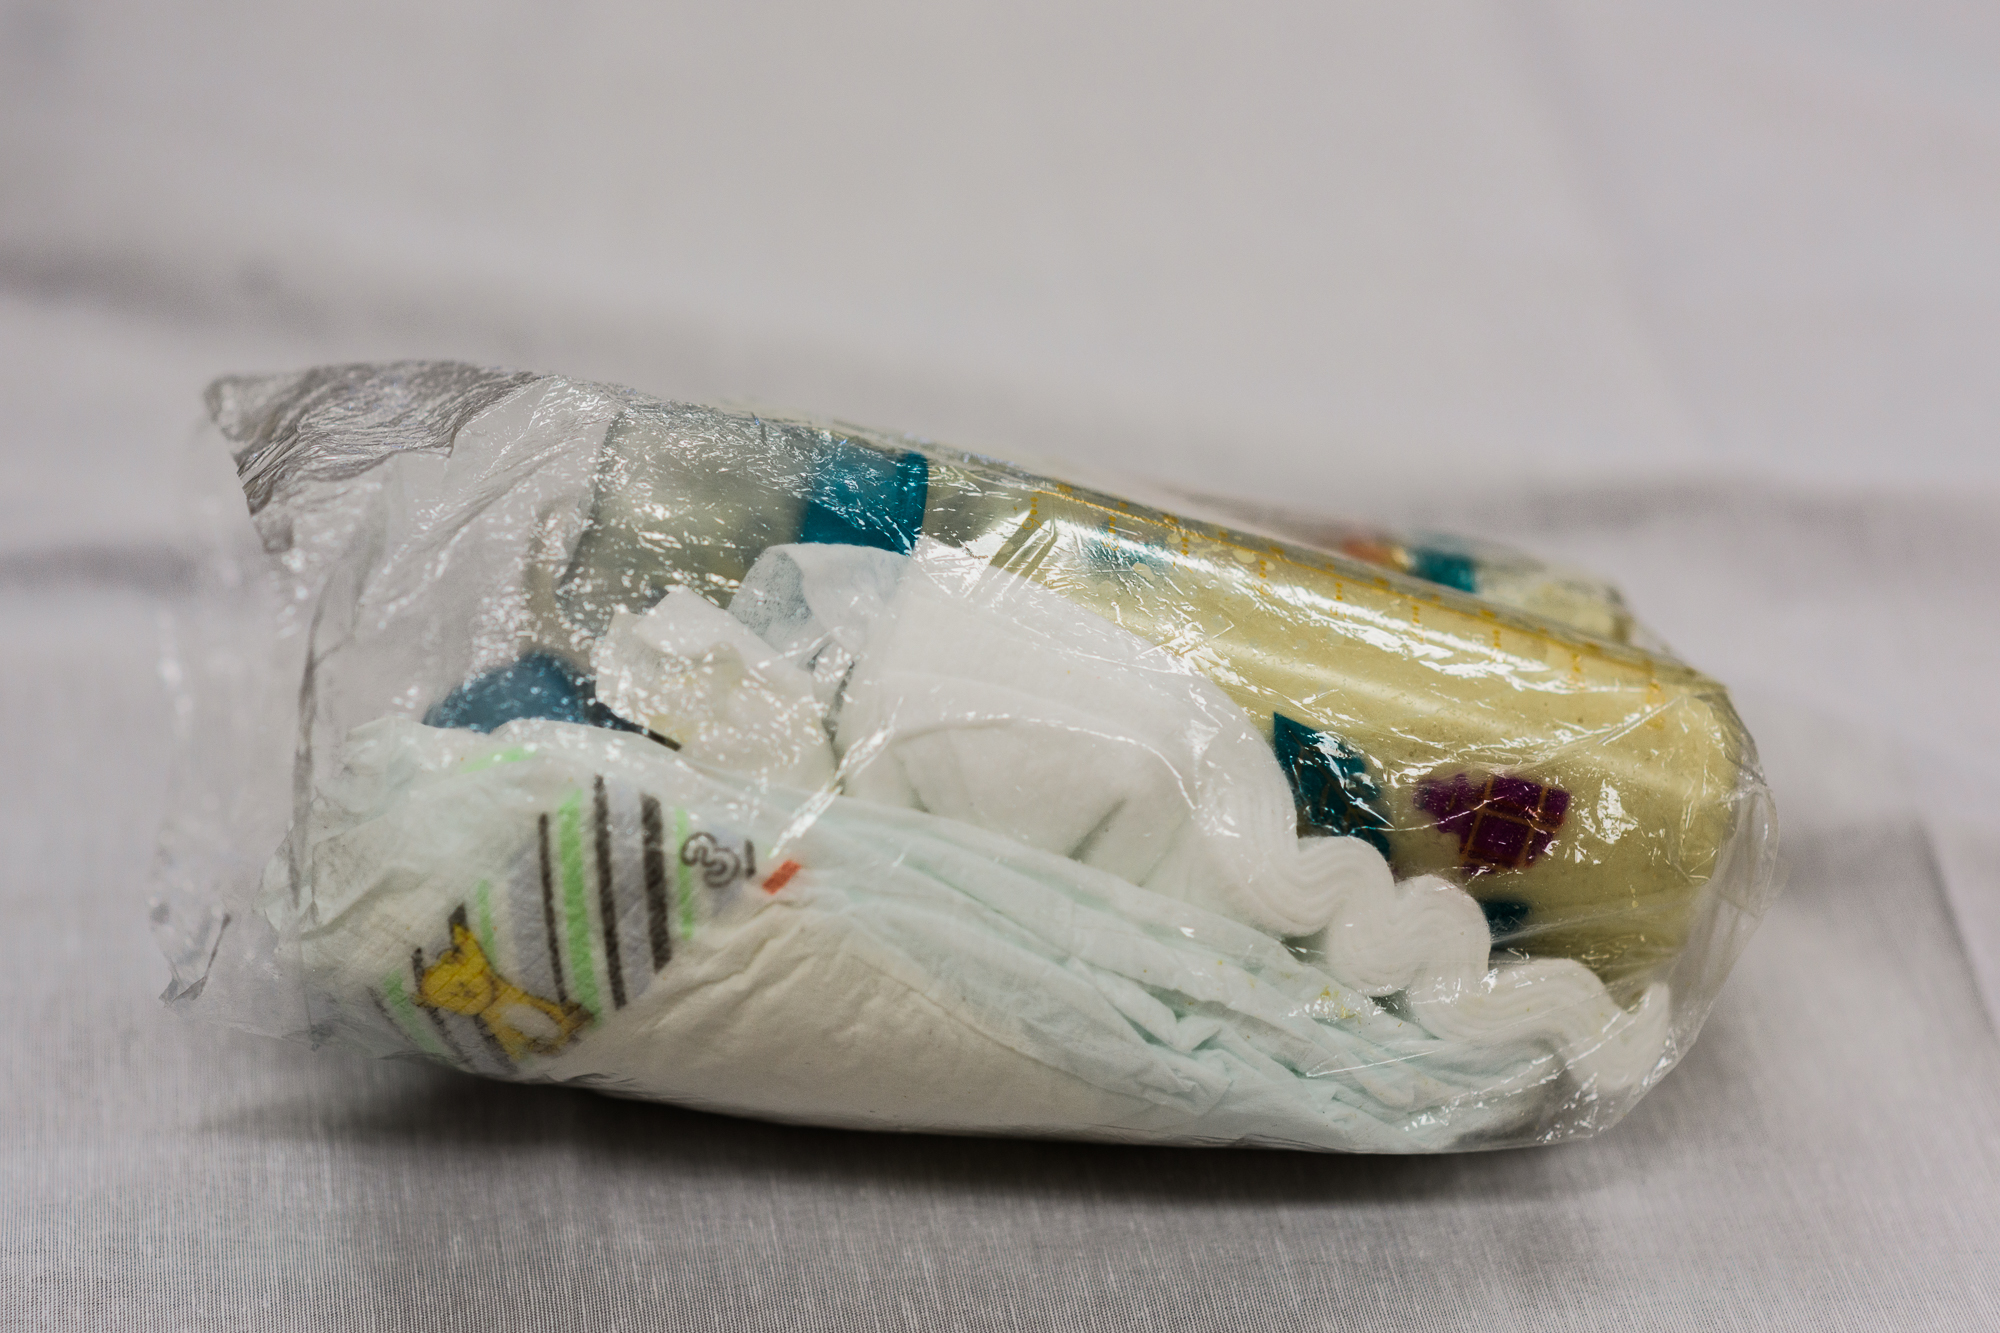  A plastic bag carrying diapers and a baby bottle sits on a table in the visitation room at the Okeechobee Correctional Institution in Okeechobee, Florida. 